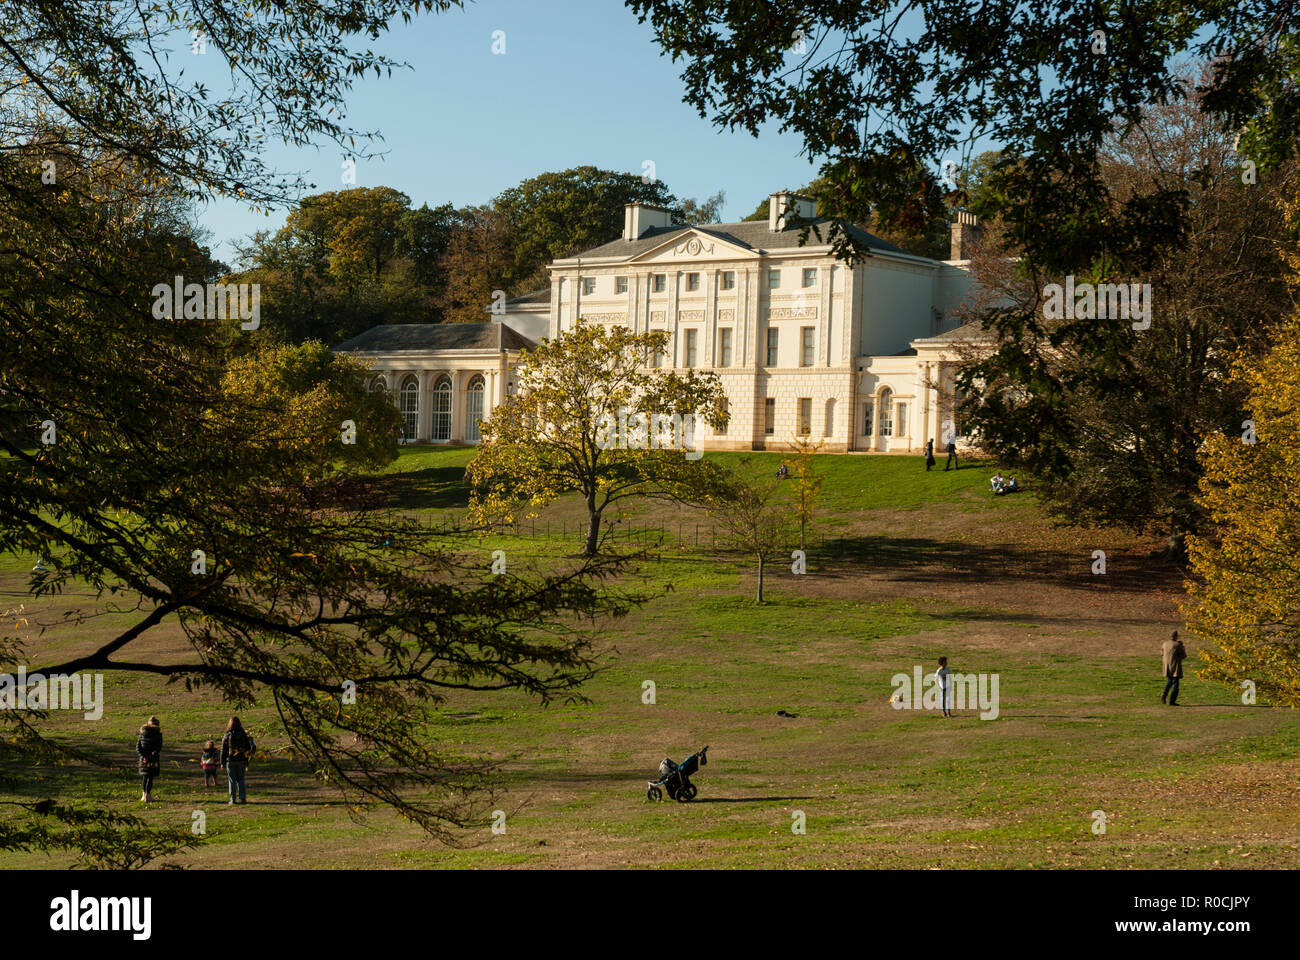 View across parkland to the sunlit facade of Robert Adams' Kenwood House, Hampstead, London. Sunny day, blue sky. Stock Photo